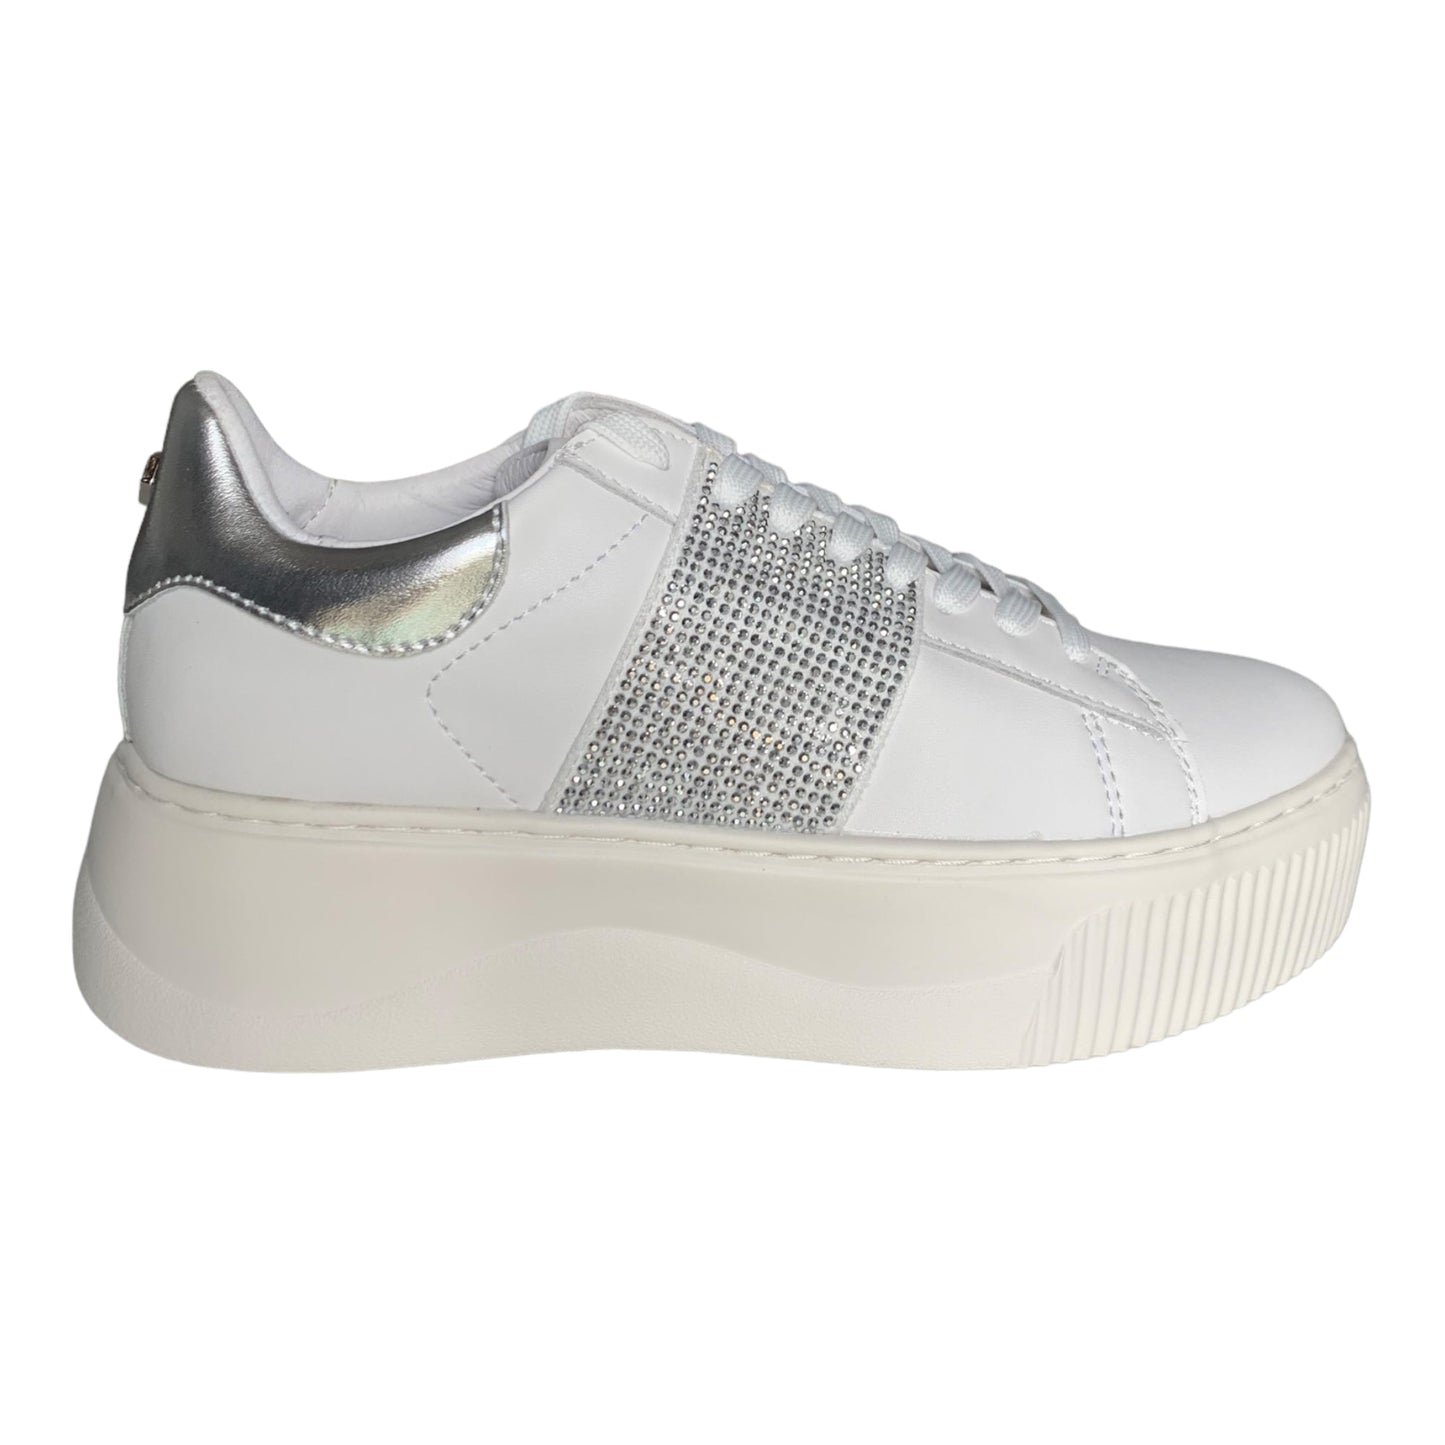 Scarpe donna Cult - Sneakers Perry Cwit 3162